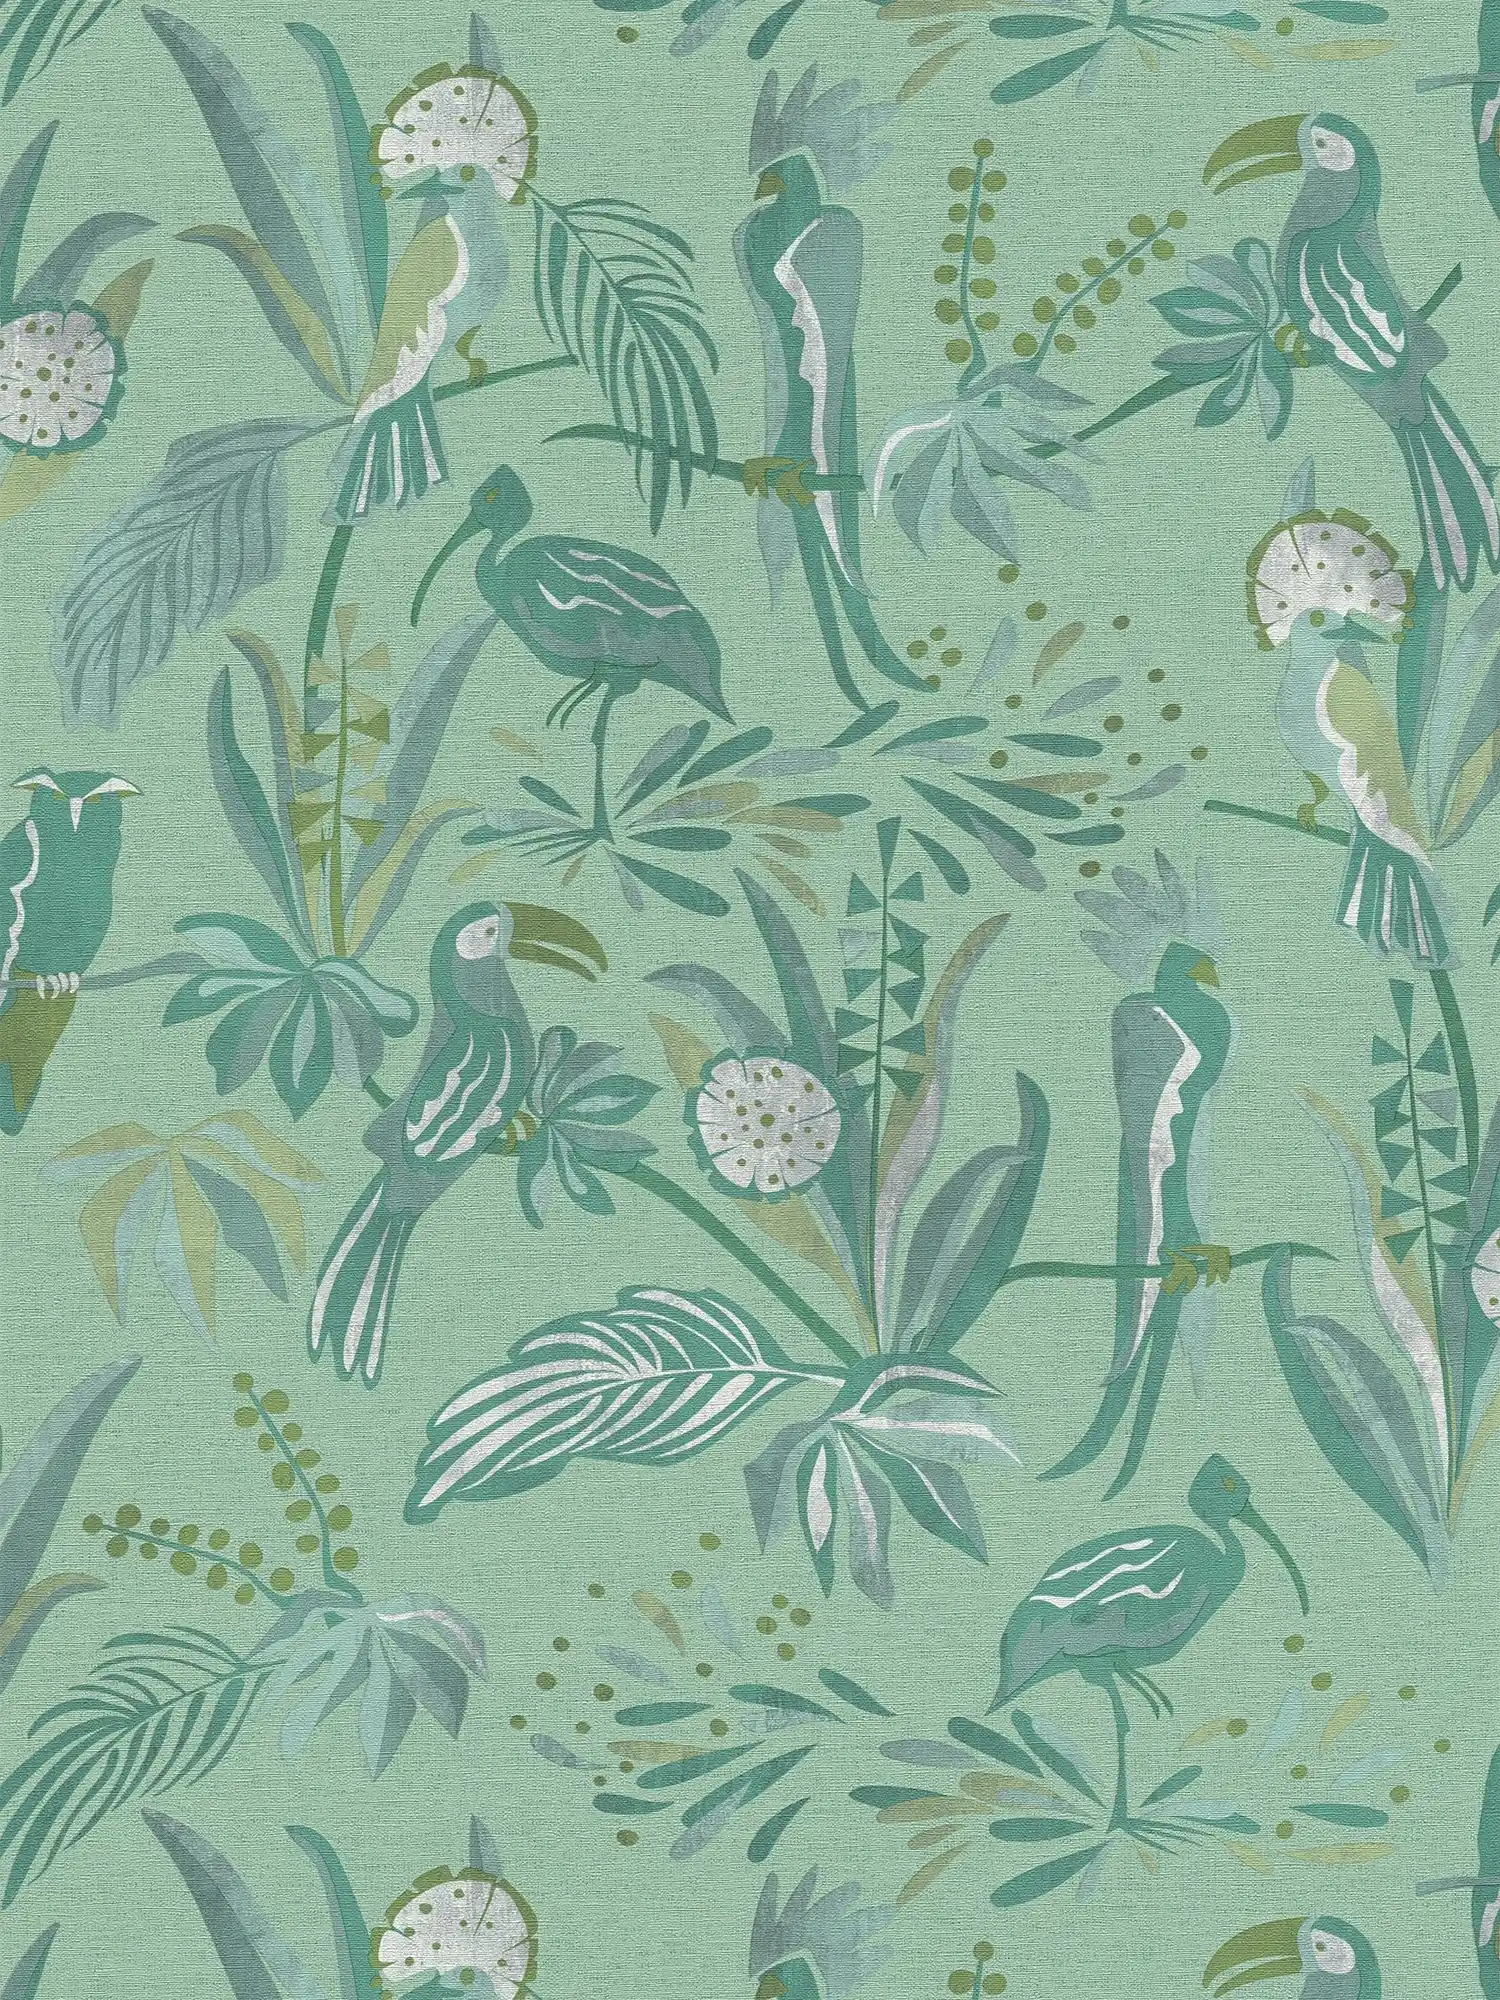 Non-woven wallpaper with jungle motif leaves & birds - green, grey
